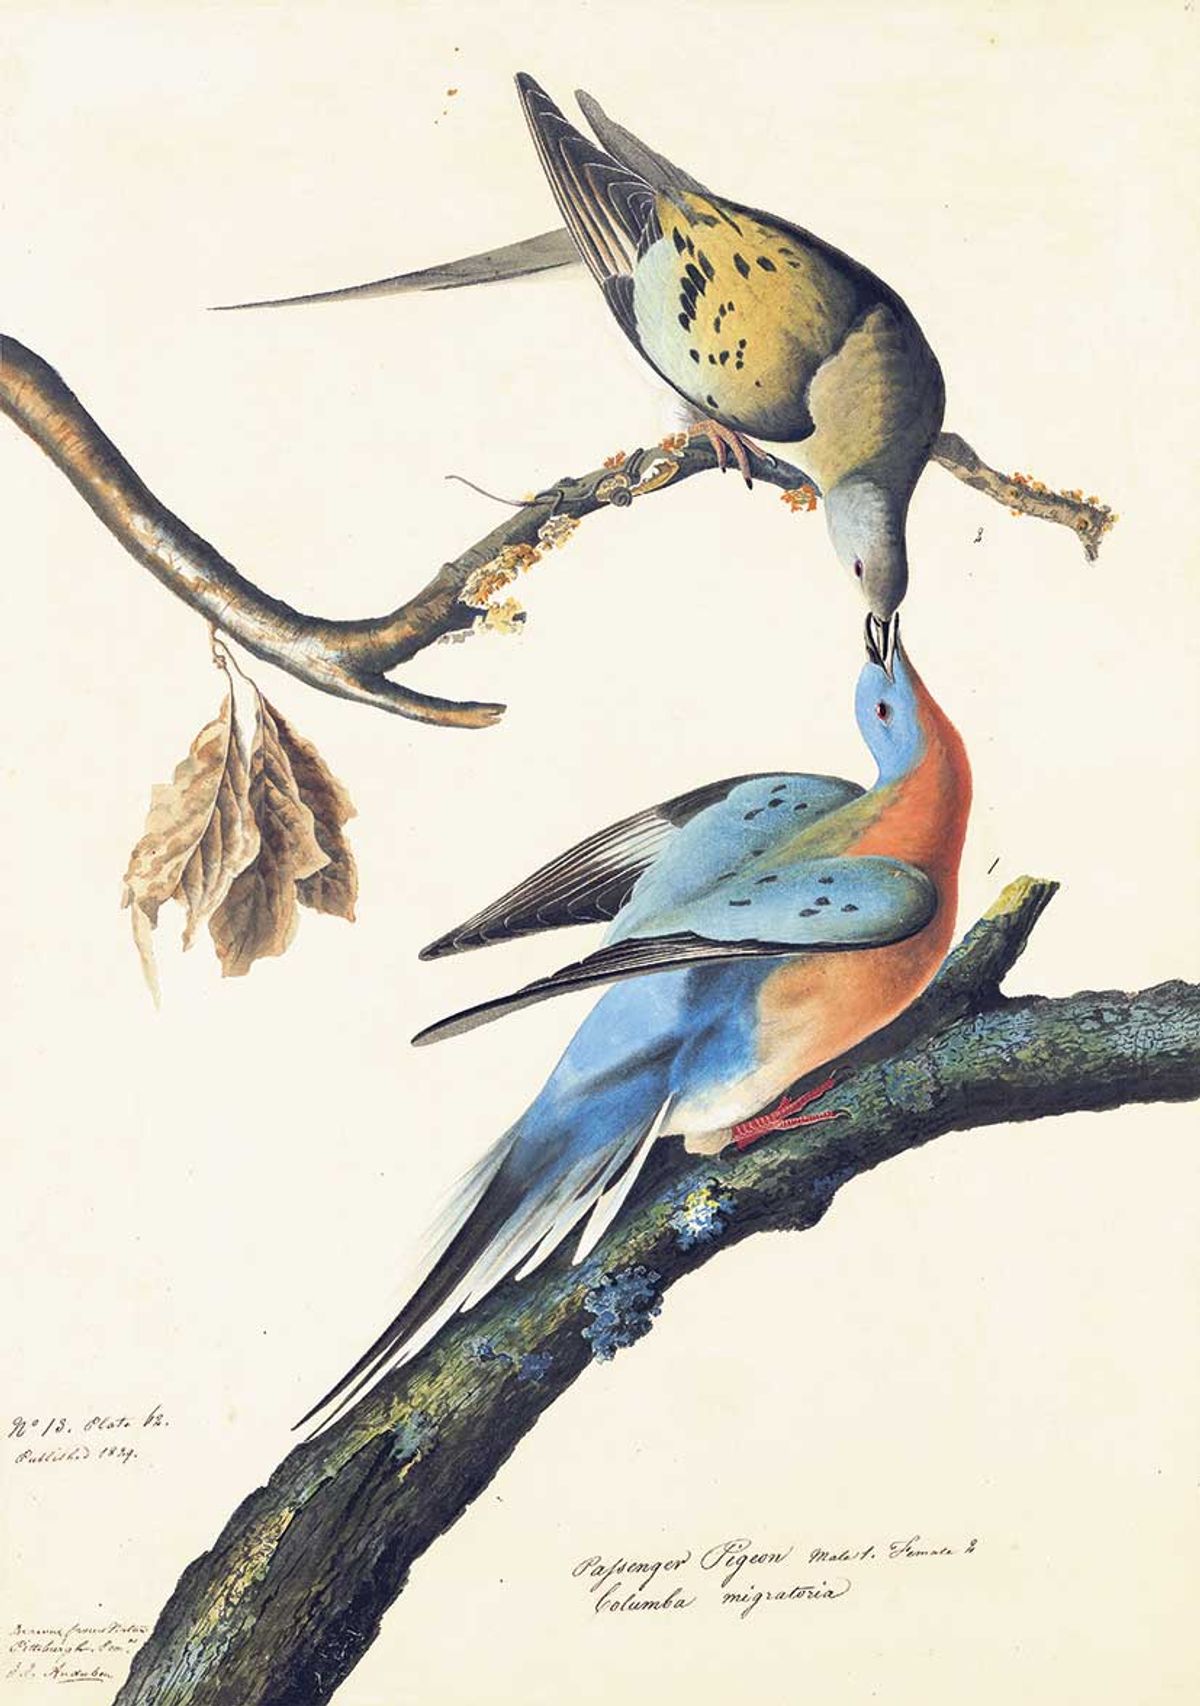 Olson suggests that Audubon’s Passenger Pigeon, Study for Havell (1824) was inspired by the classical myth of Amor and Psyche

New-York Historical Society